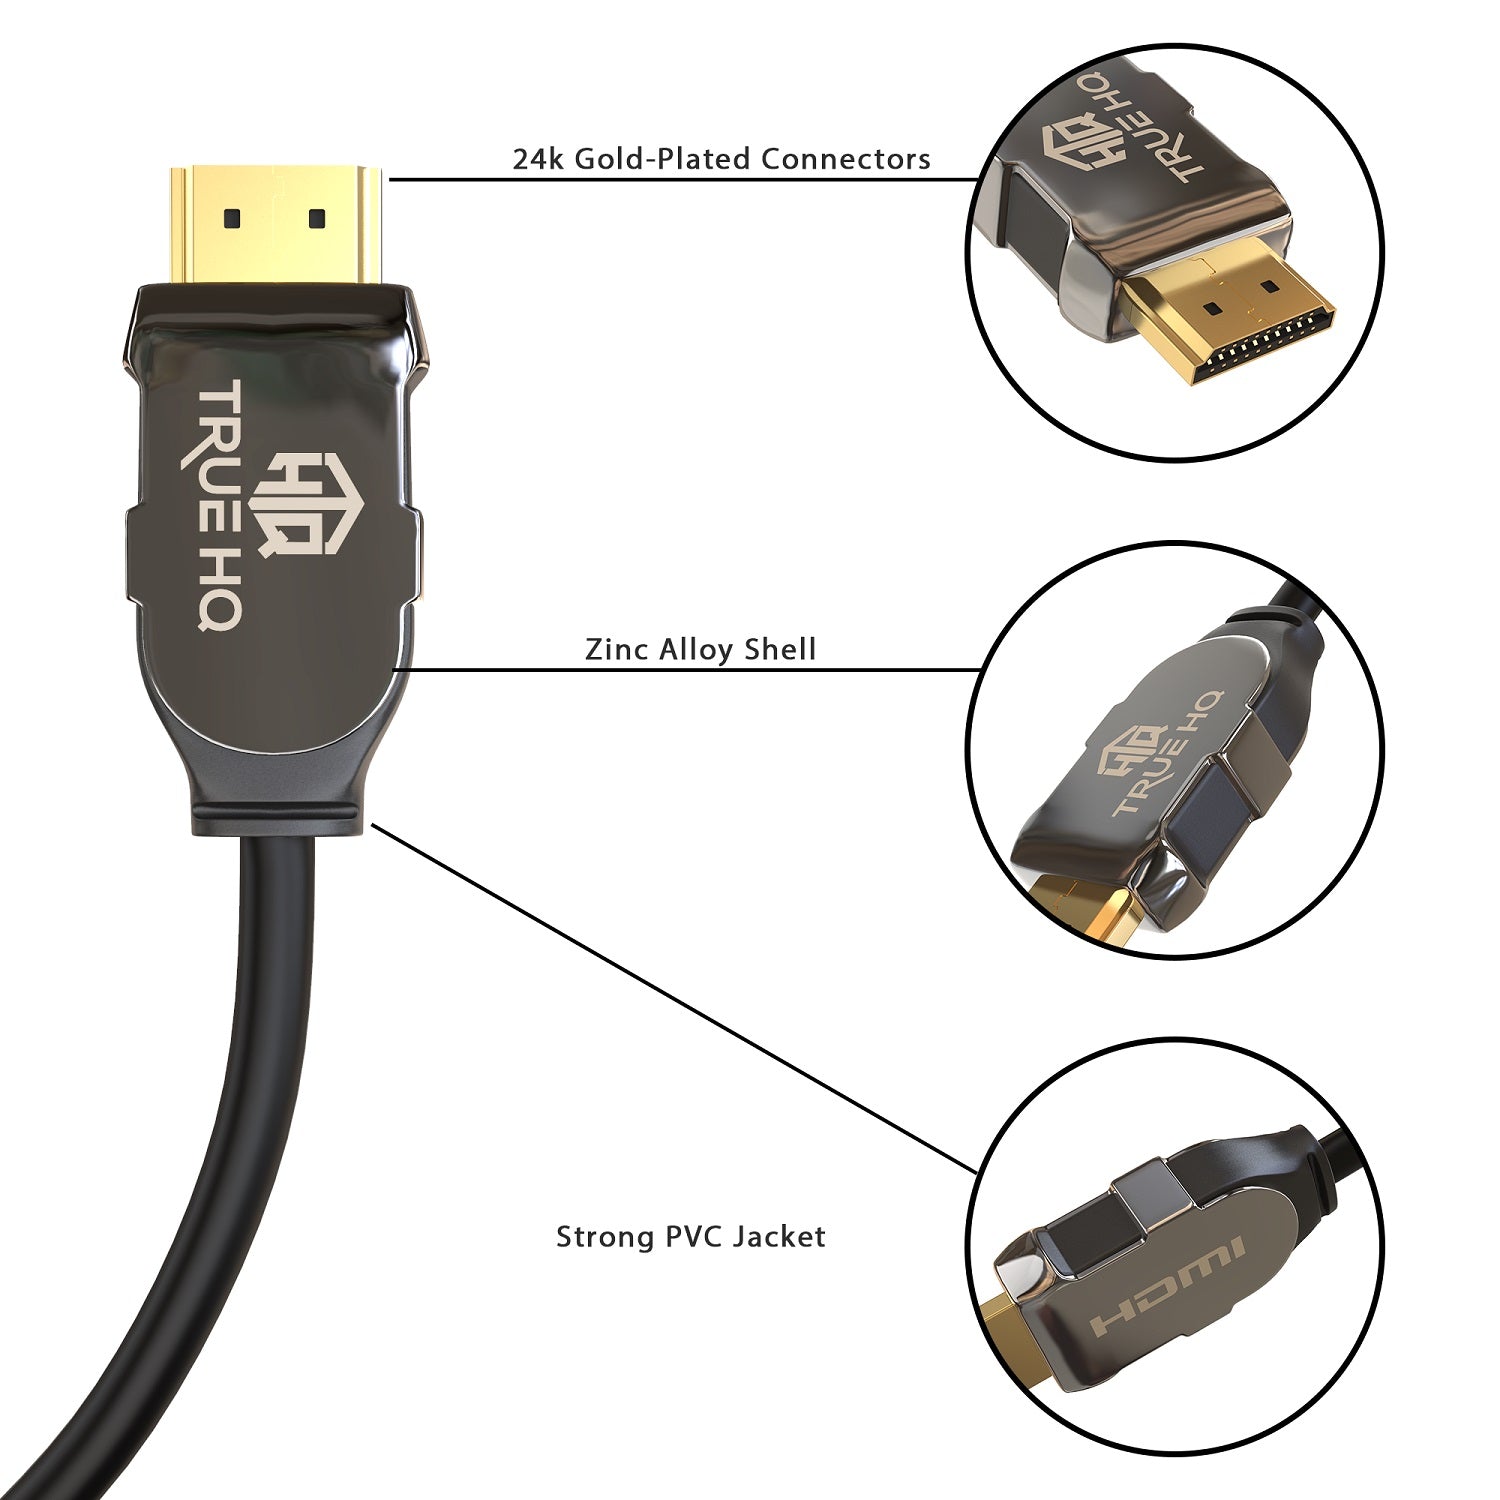 Cruxtec 3m Certified Ultra High Speed HDMI 2.1 Cable 48Gbps ( 8K